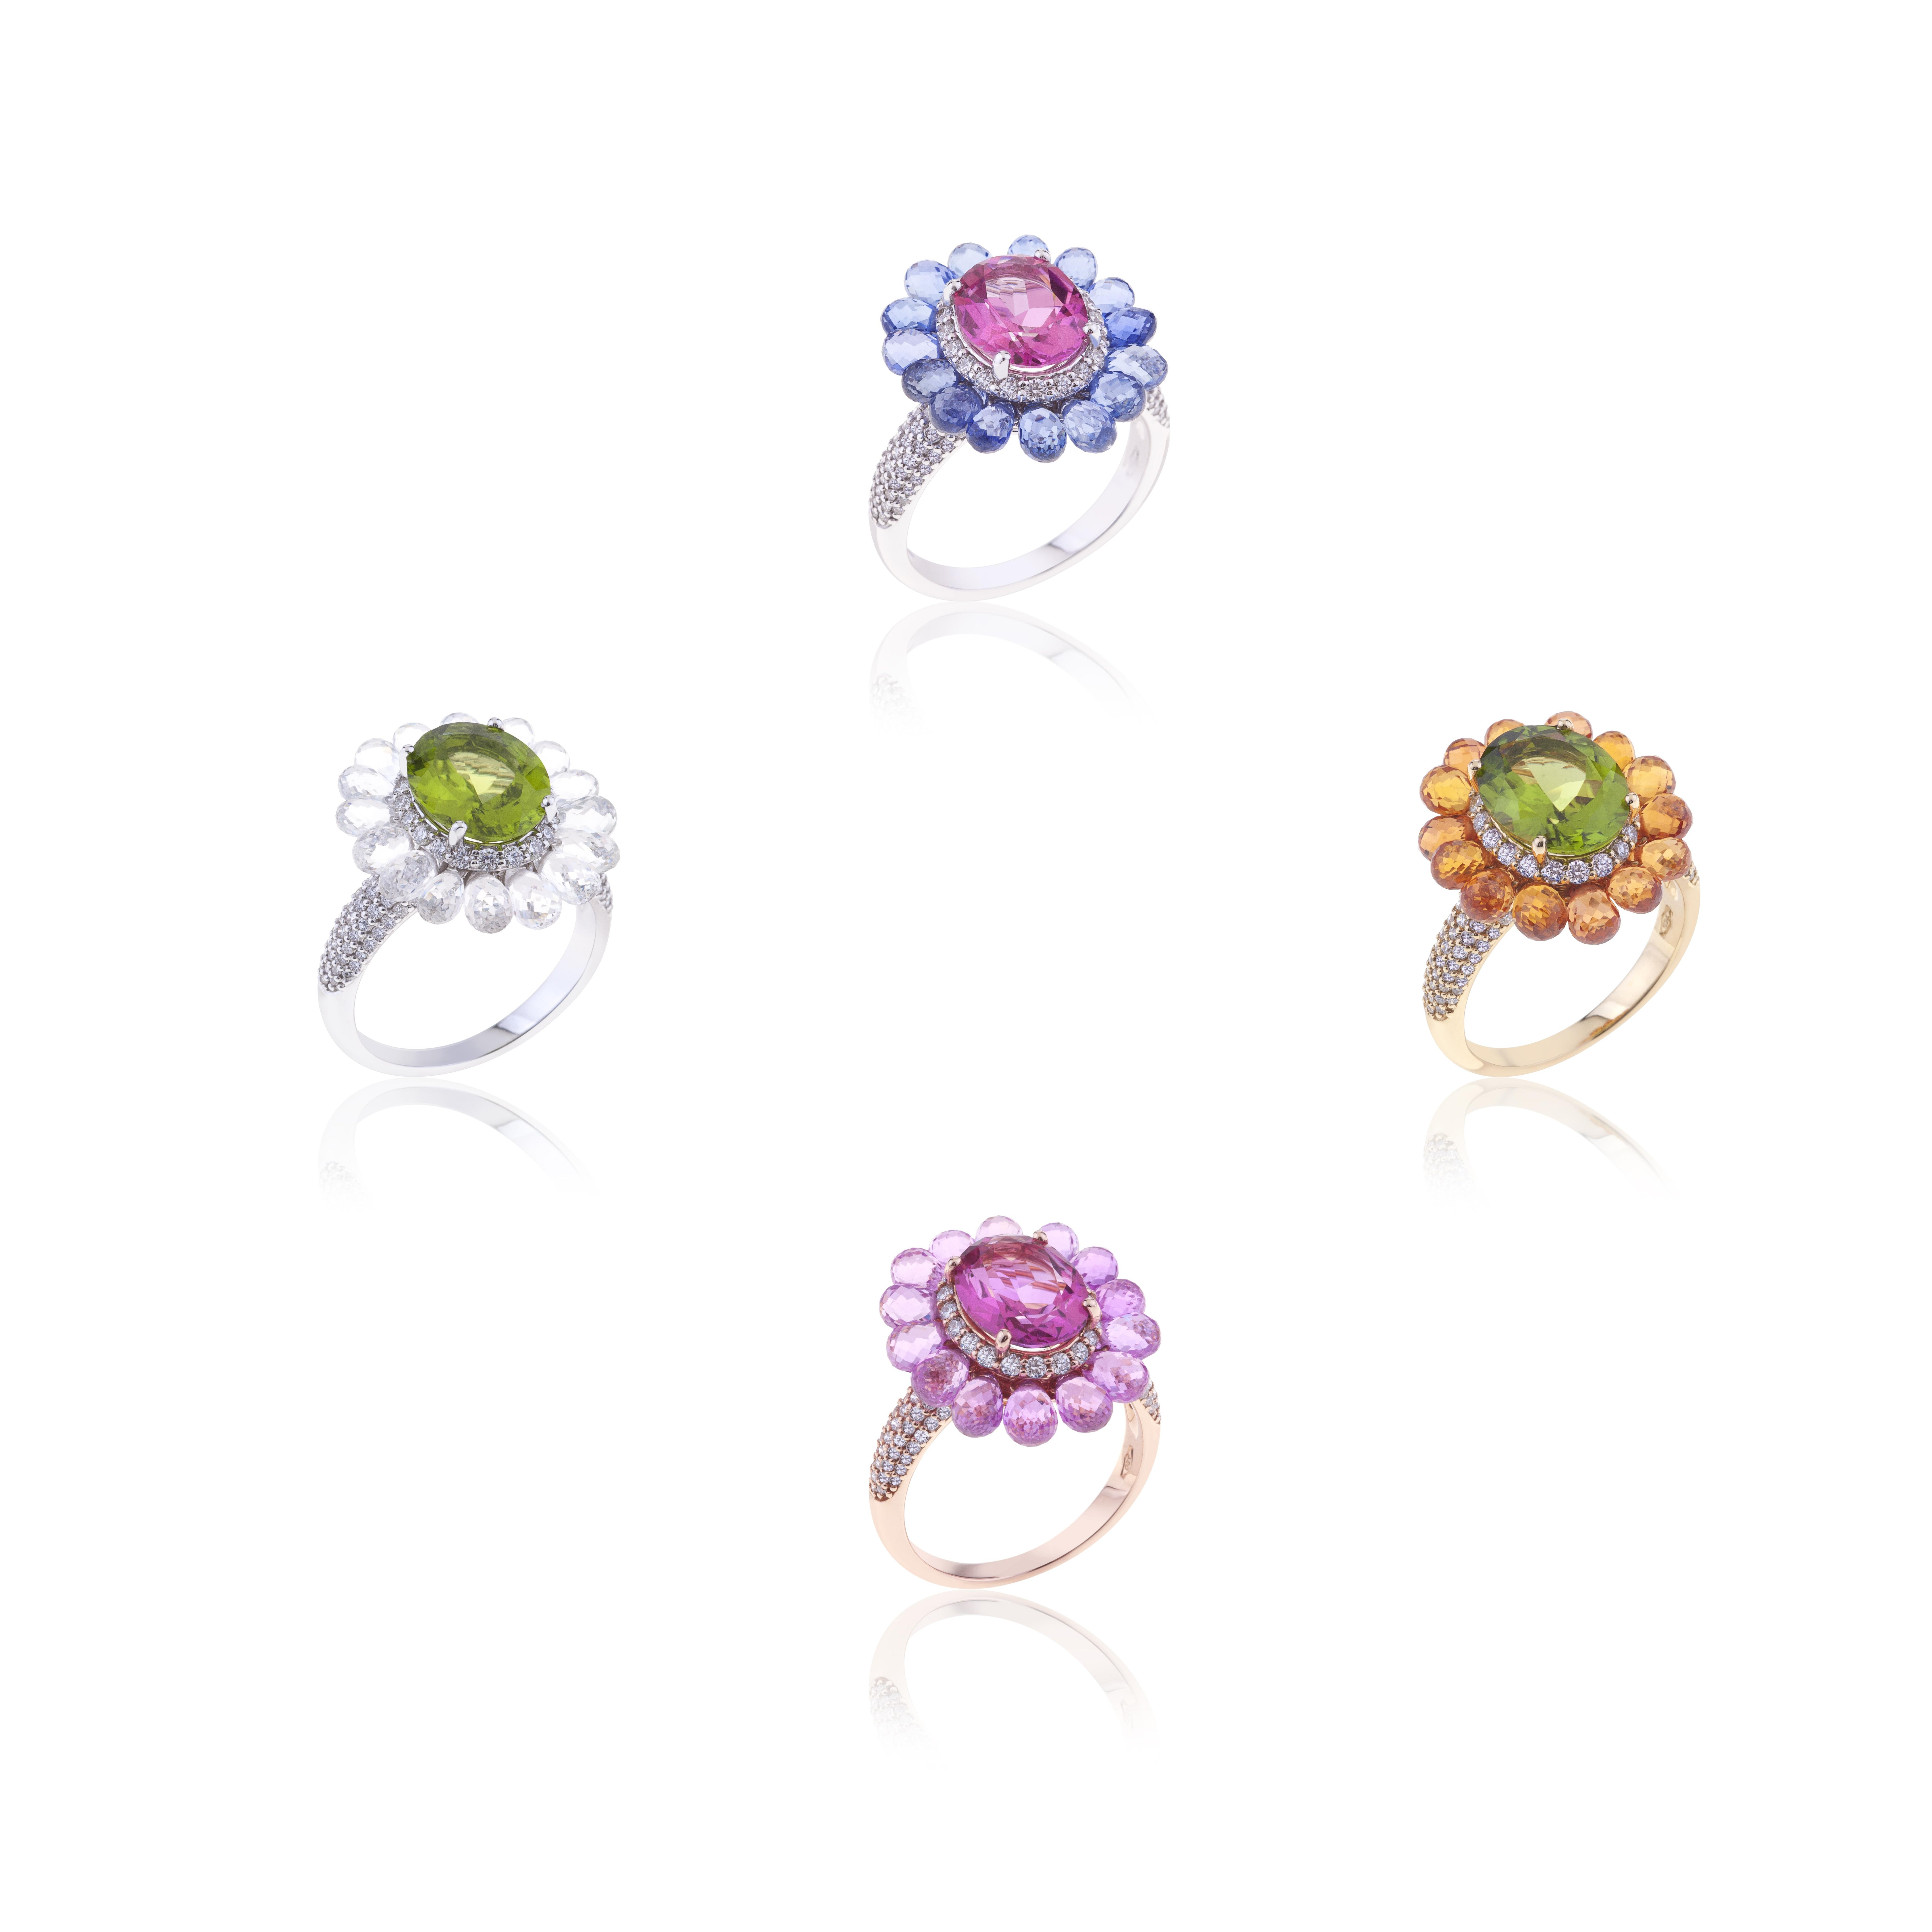 Flower Happy Ring 18kt White Gold With Oval Pink Topaz, Pear Blue Sapphires and Diamonds.
This coloured ring transmit Happiness to ladies who will wear it, together with preciousness deriving from a circle of natural white sapphires.
Gold Weight is